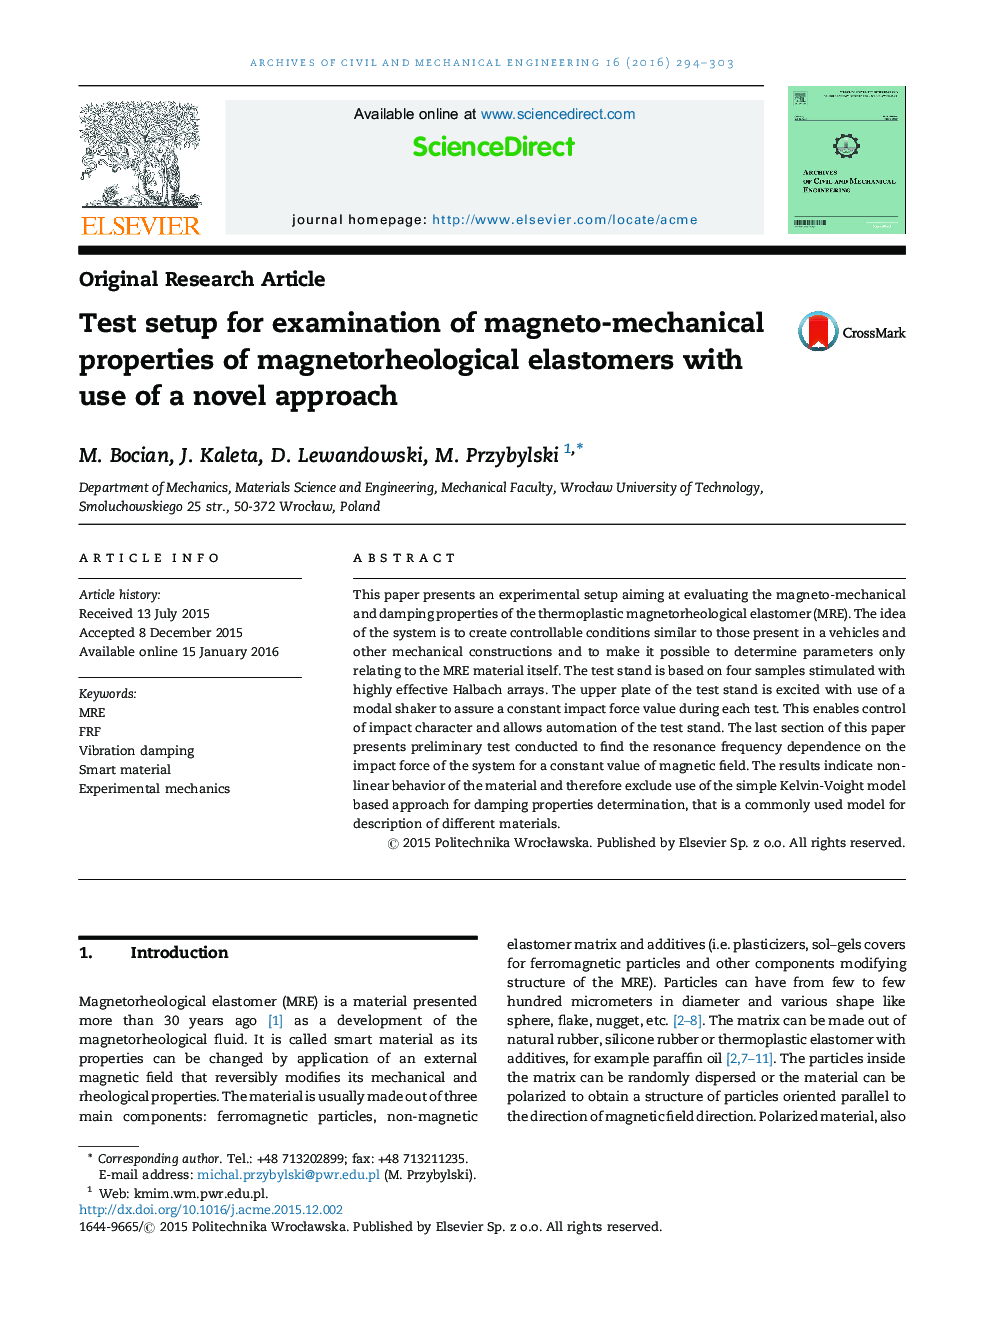 Test setup for examination of magneto-mechanical properties of magnetorheological elastomers with use of a novel approach